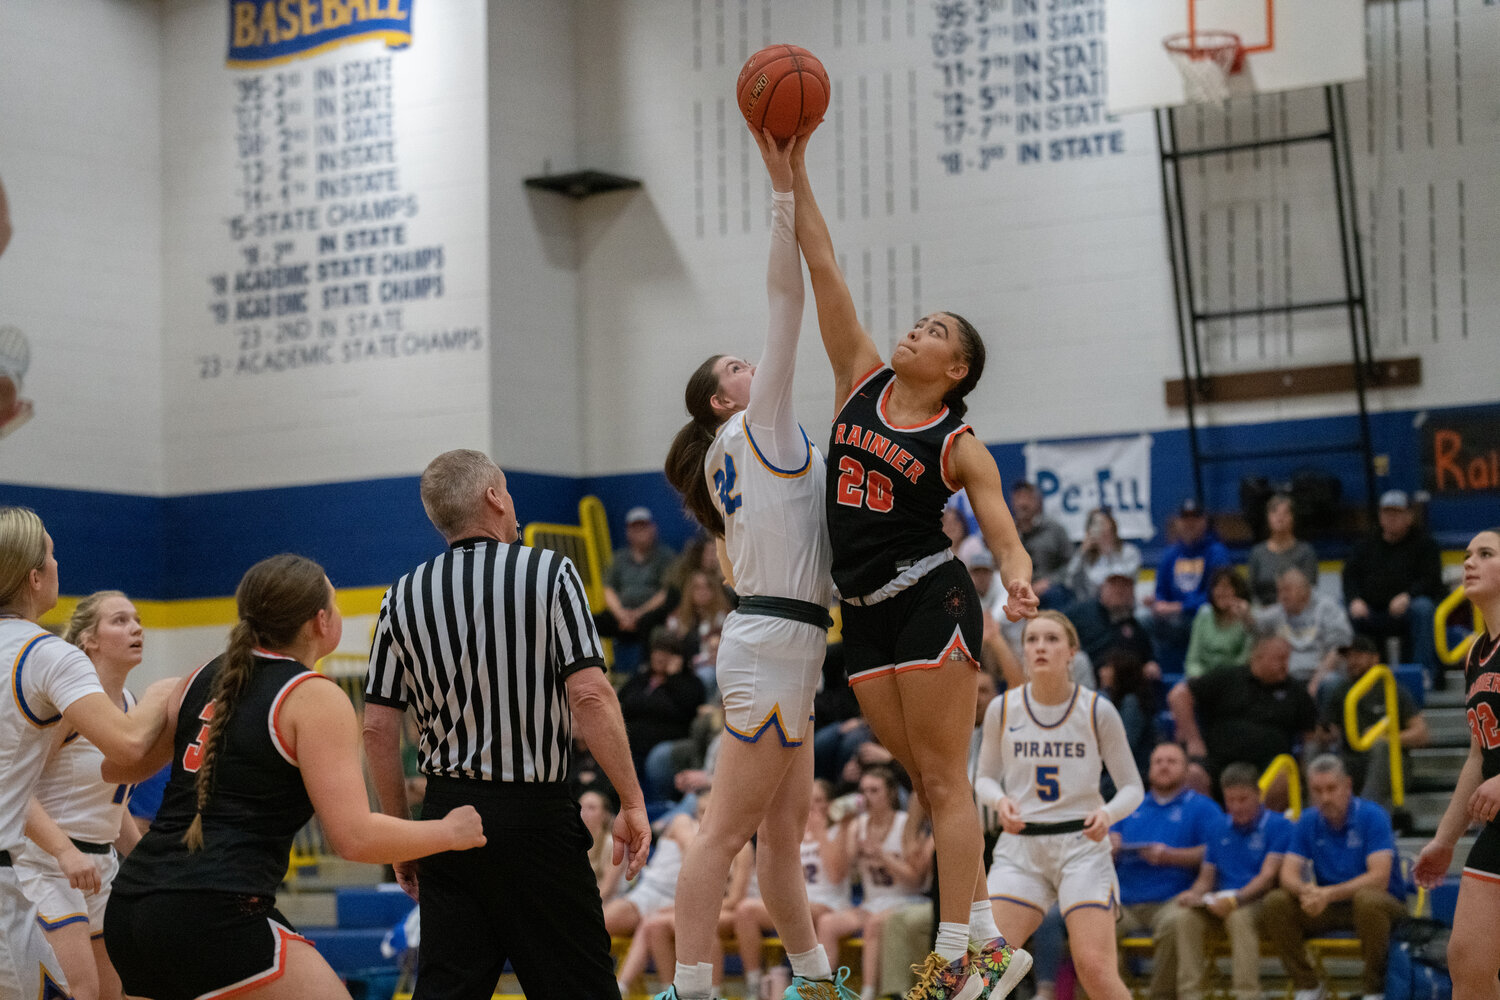 Adna's Bailey Chapman and Rainier's Janess Blackburn jump for the opening tip during the Pirates' matchup against the Mountaineers, Dec. 8 in Adna.